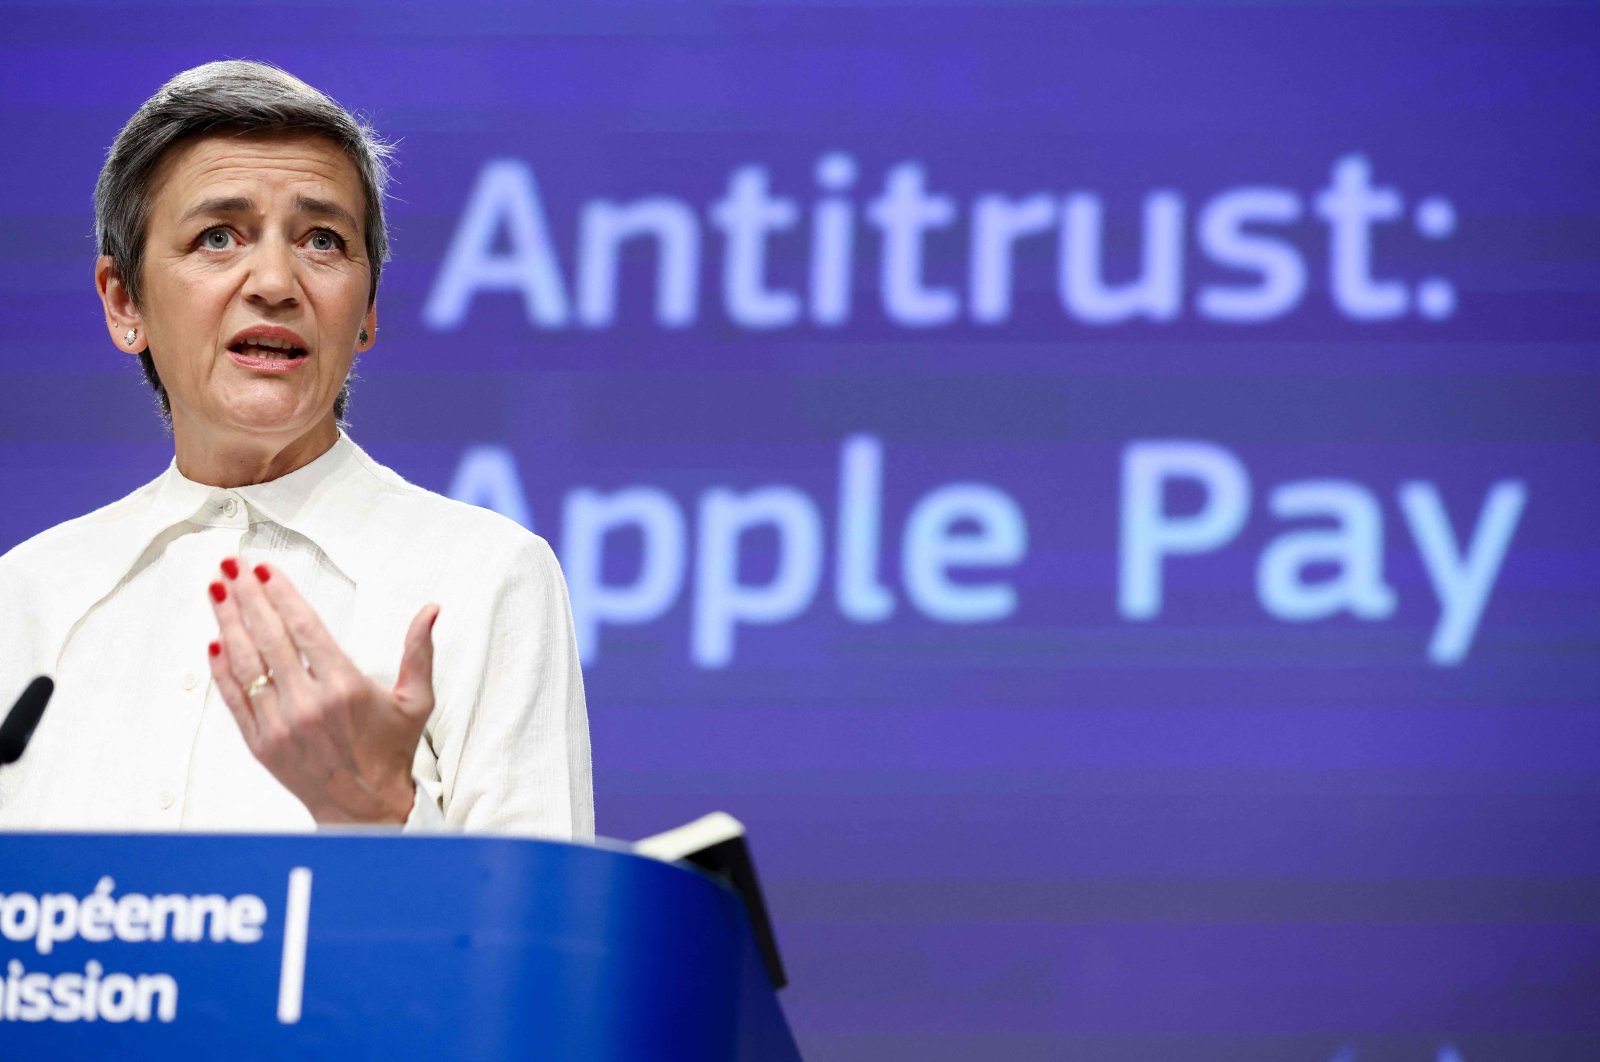 European Commission Vice-President Margrethe Vestager gives a press conference on EU objections sent to Apple over practices regarding Apple Pay, at the EU headquarters in Brussels, Belgium, May 2, 2022. (AFP Photo)